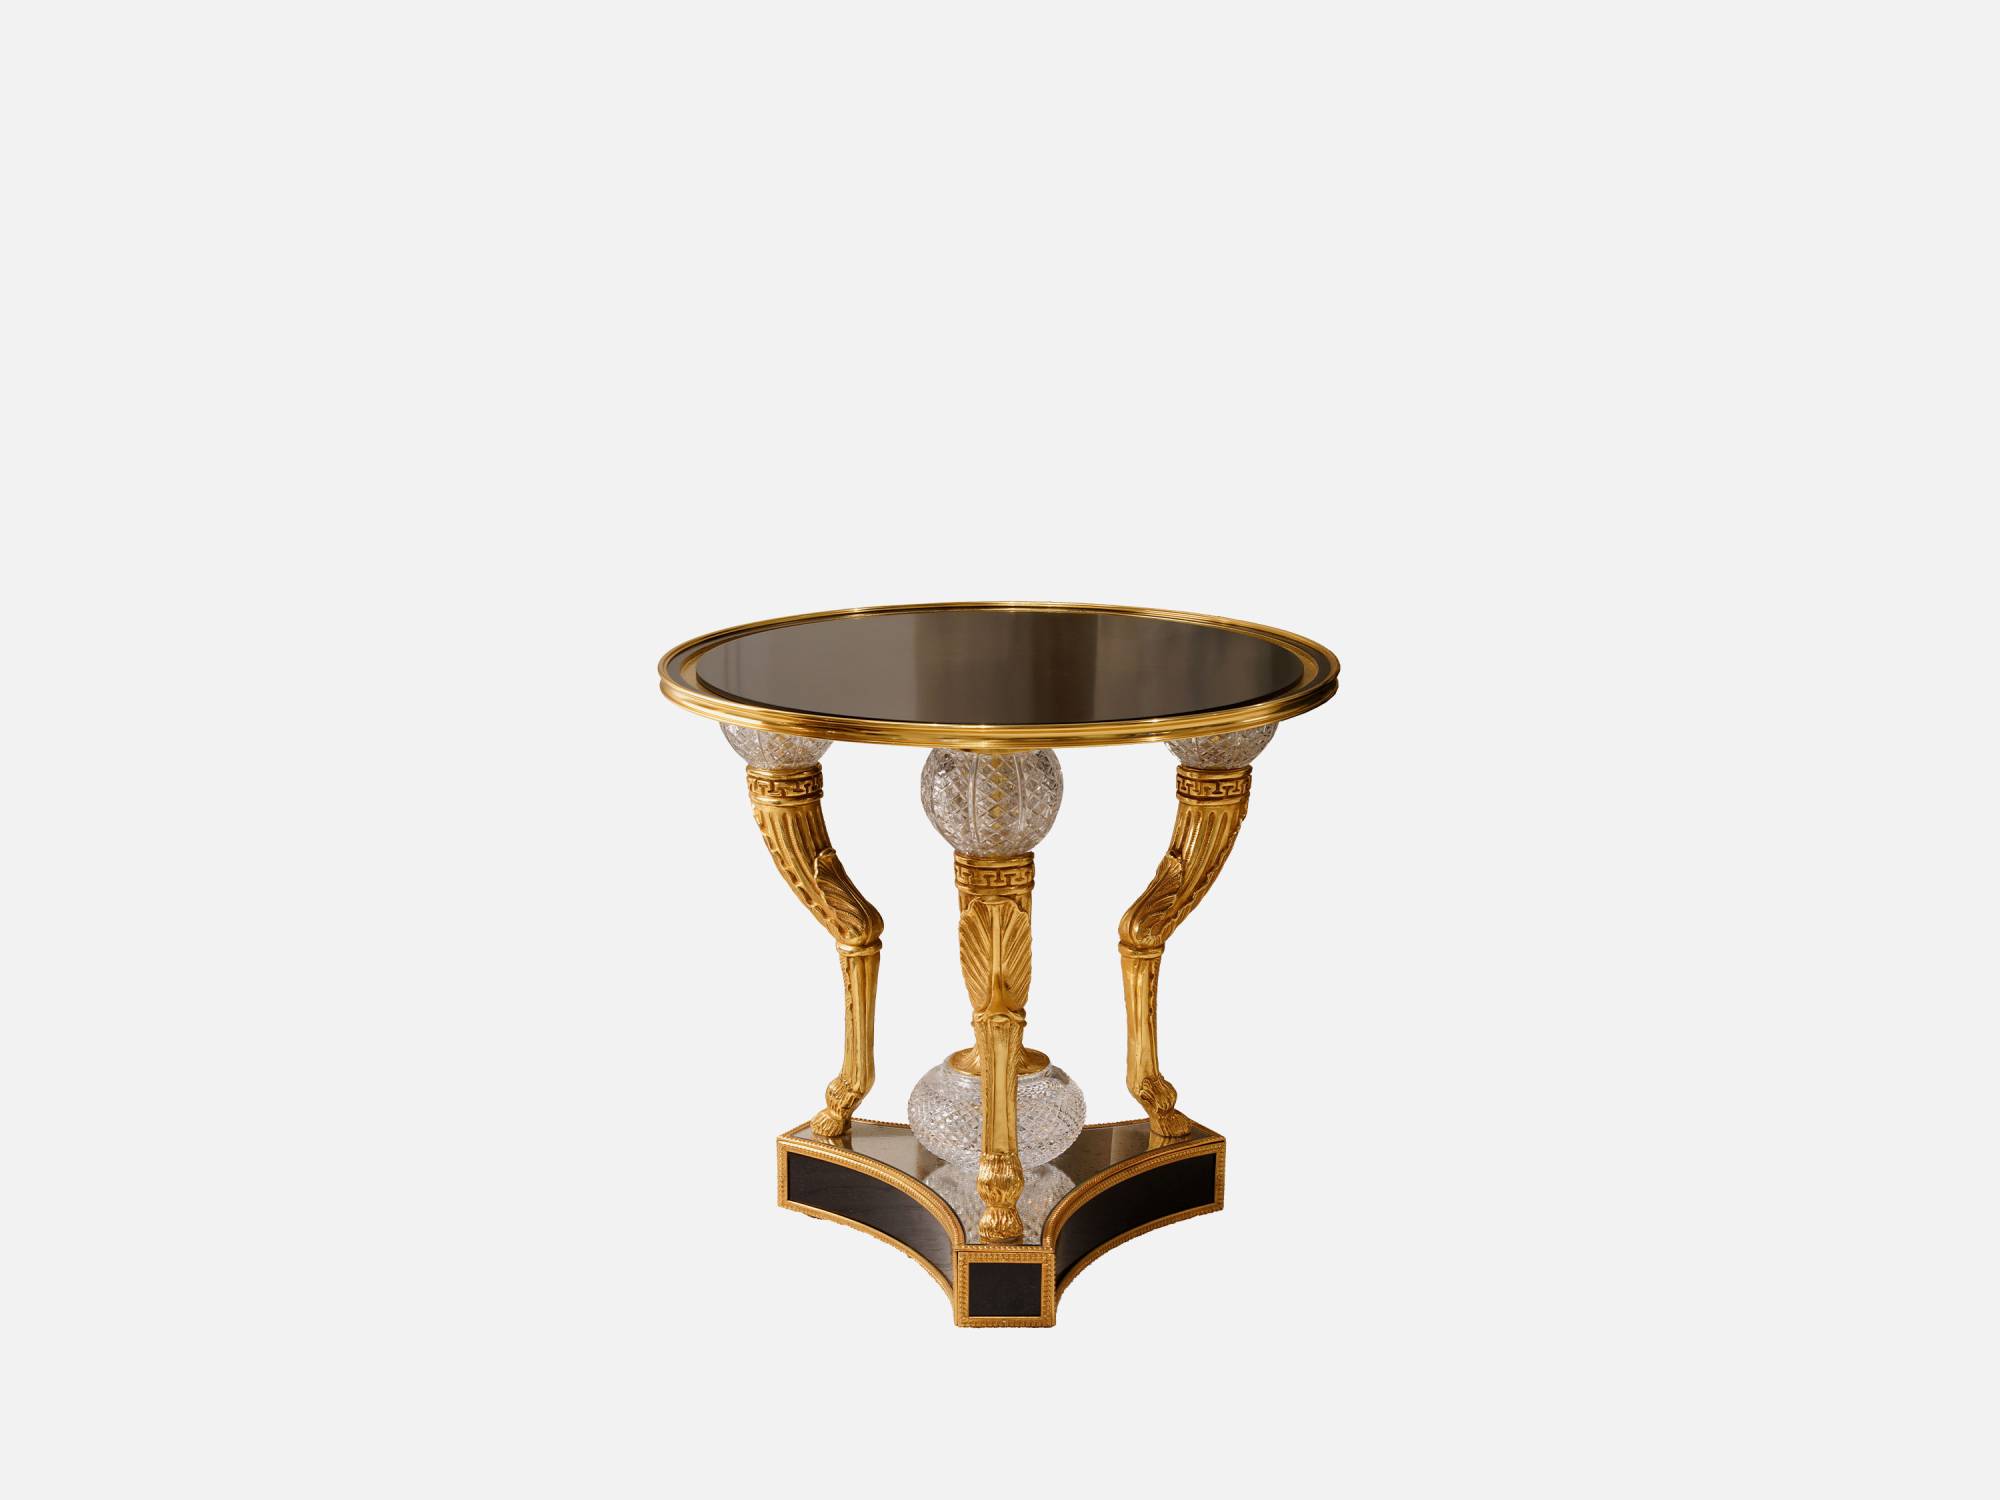 ART. 2212 – The elegance of luxury classic Small tables made in Italy by C.G. Capelletti.